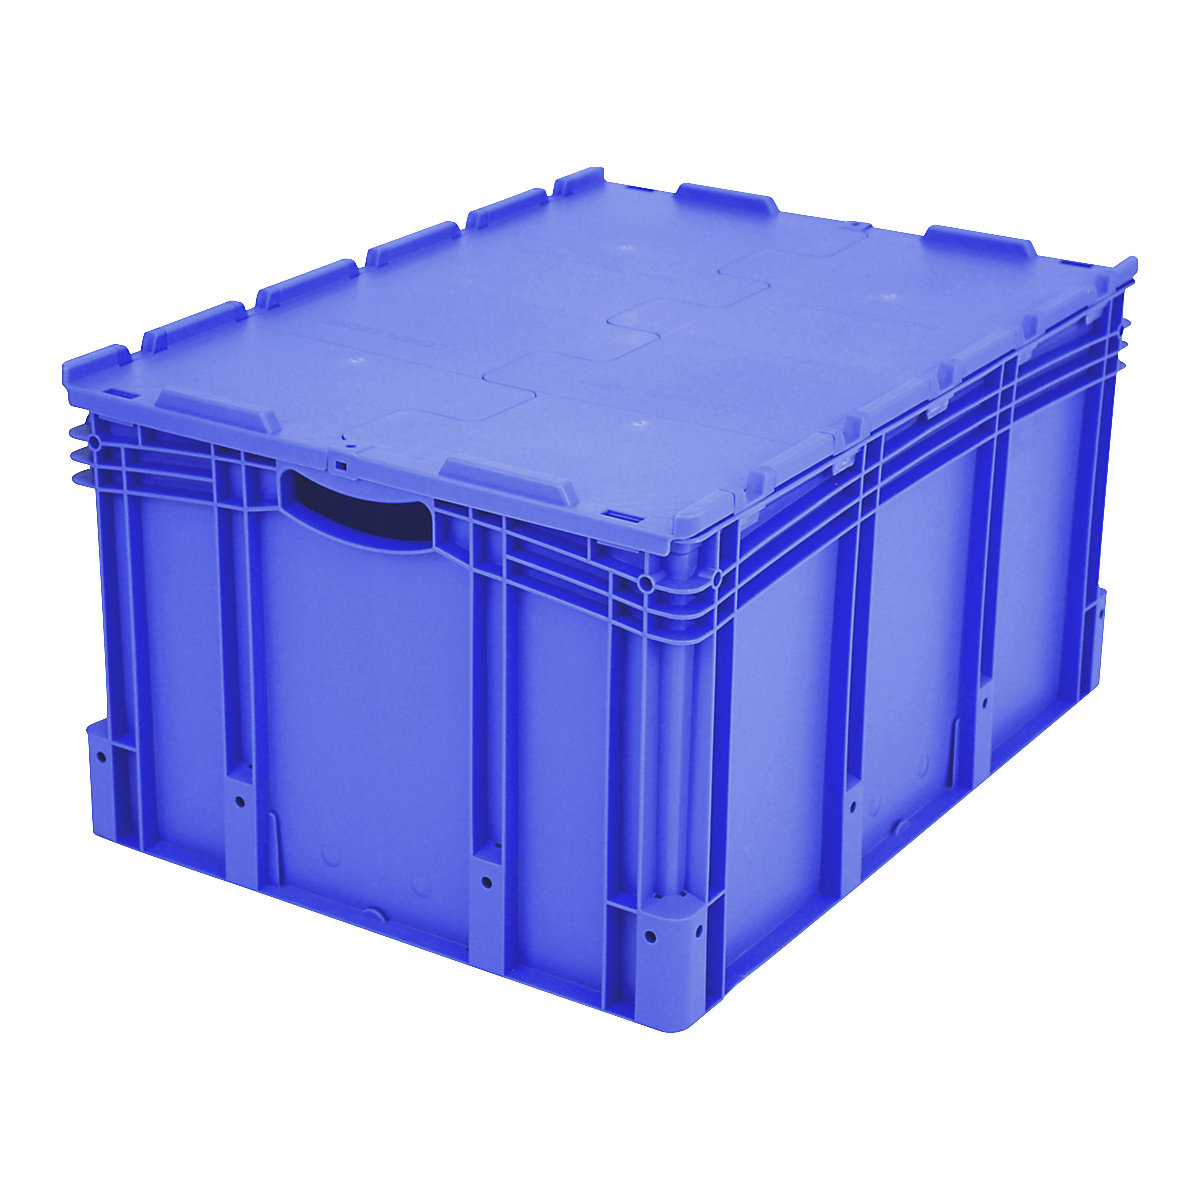 XL Euro stacking container – BITO, with 2-section hinged lid, LxWxH 800 x 600 x 438 mm-11